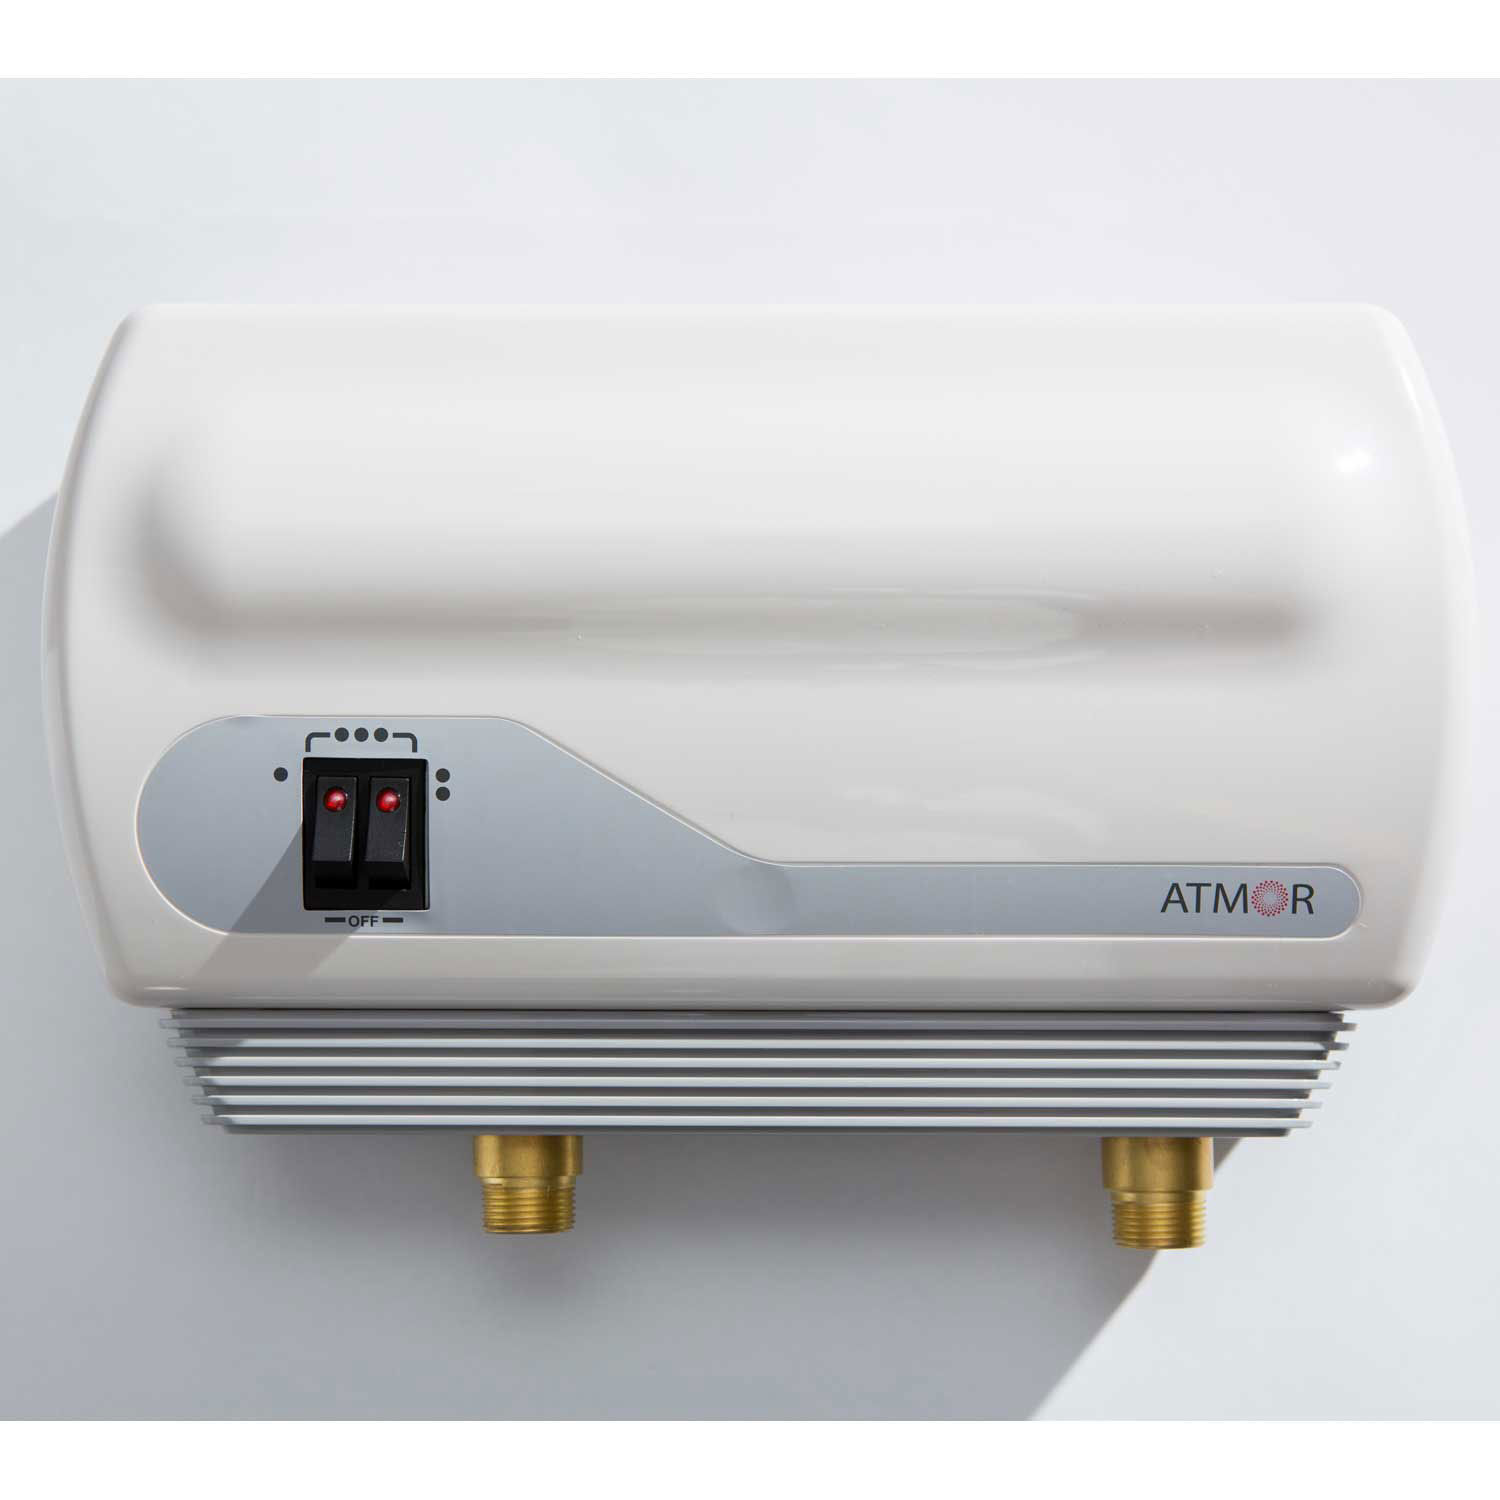 atmor-point-of-use-tankless-electric-instant-water-heater-13-kw-240v